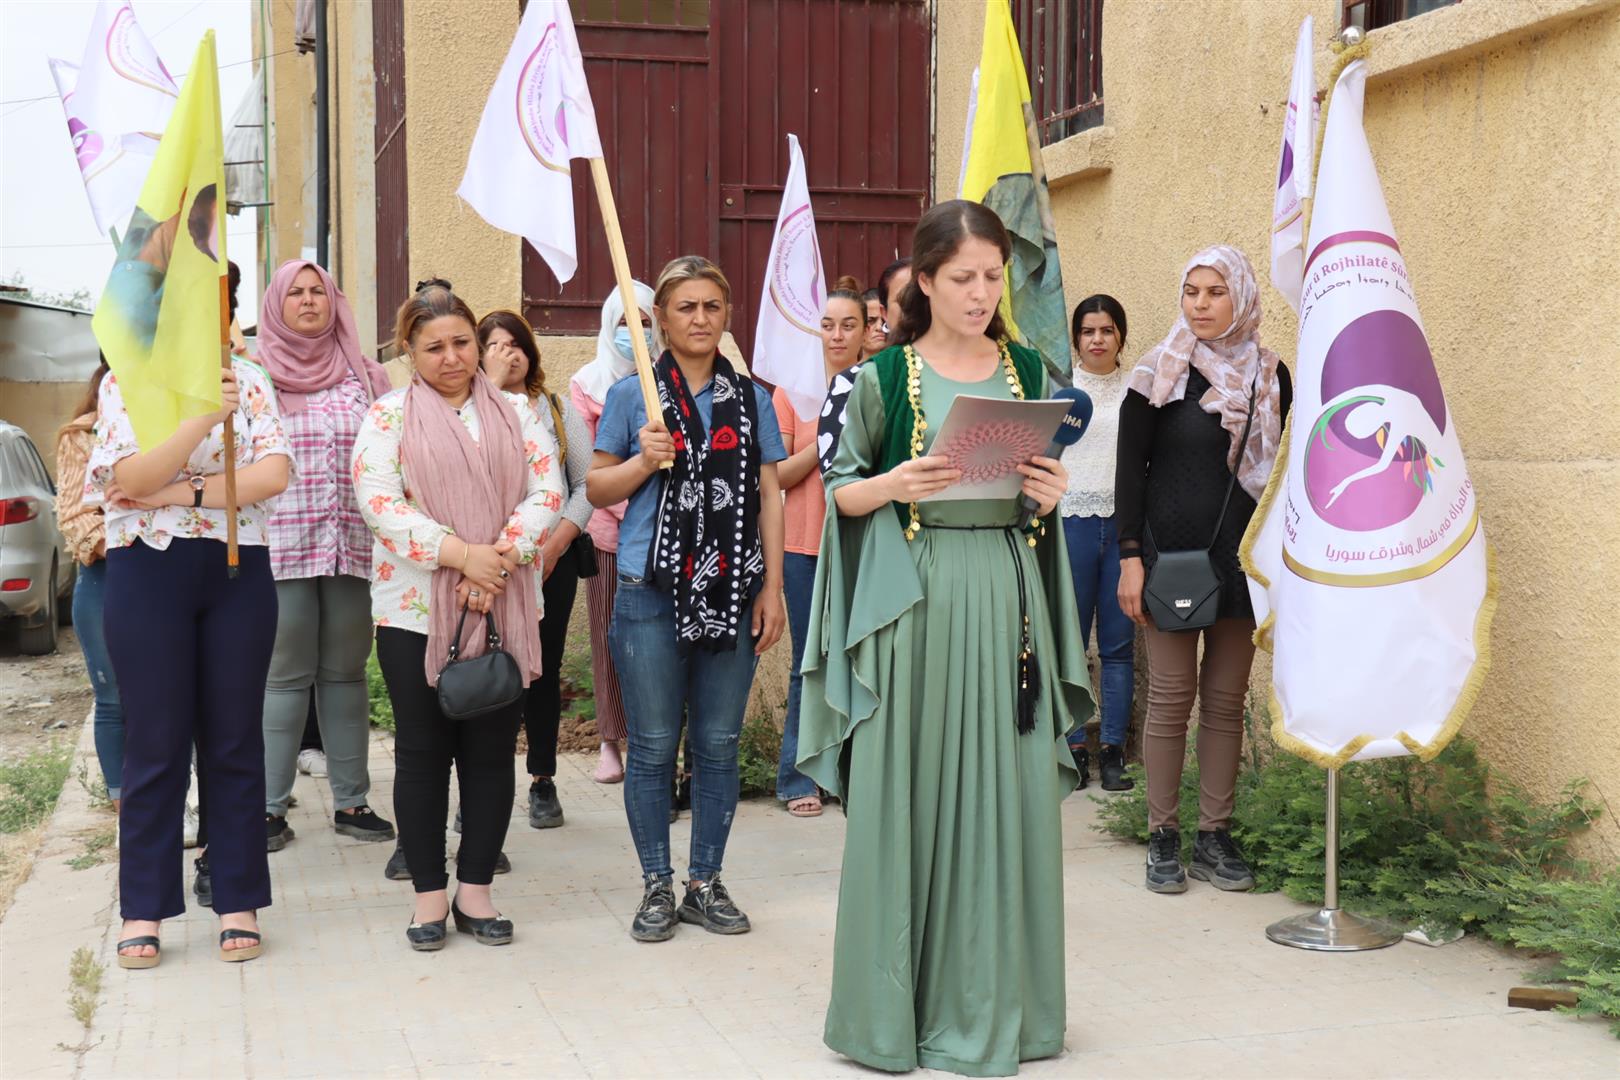 Feminists’ organizations should not remain idle in the face of Makhmour's siege